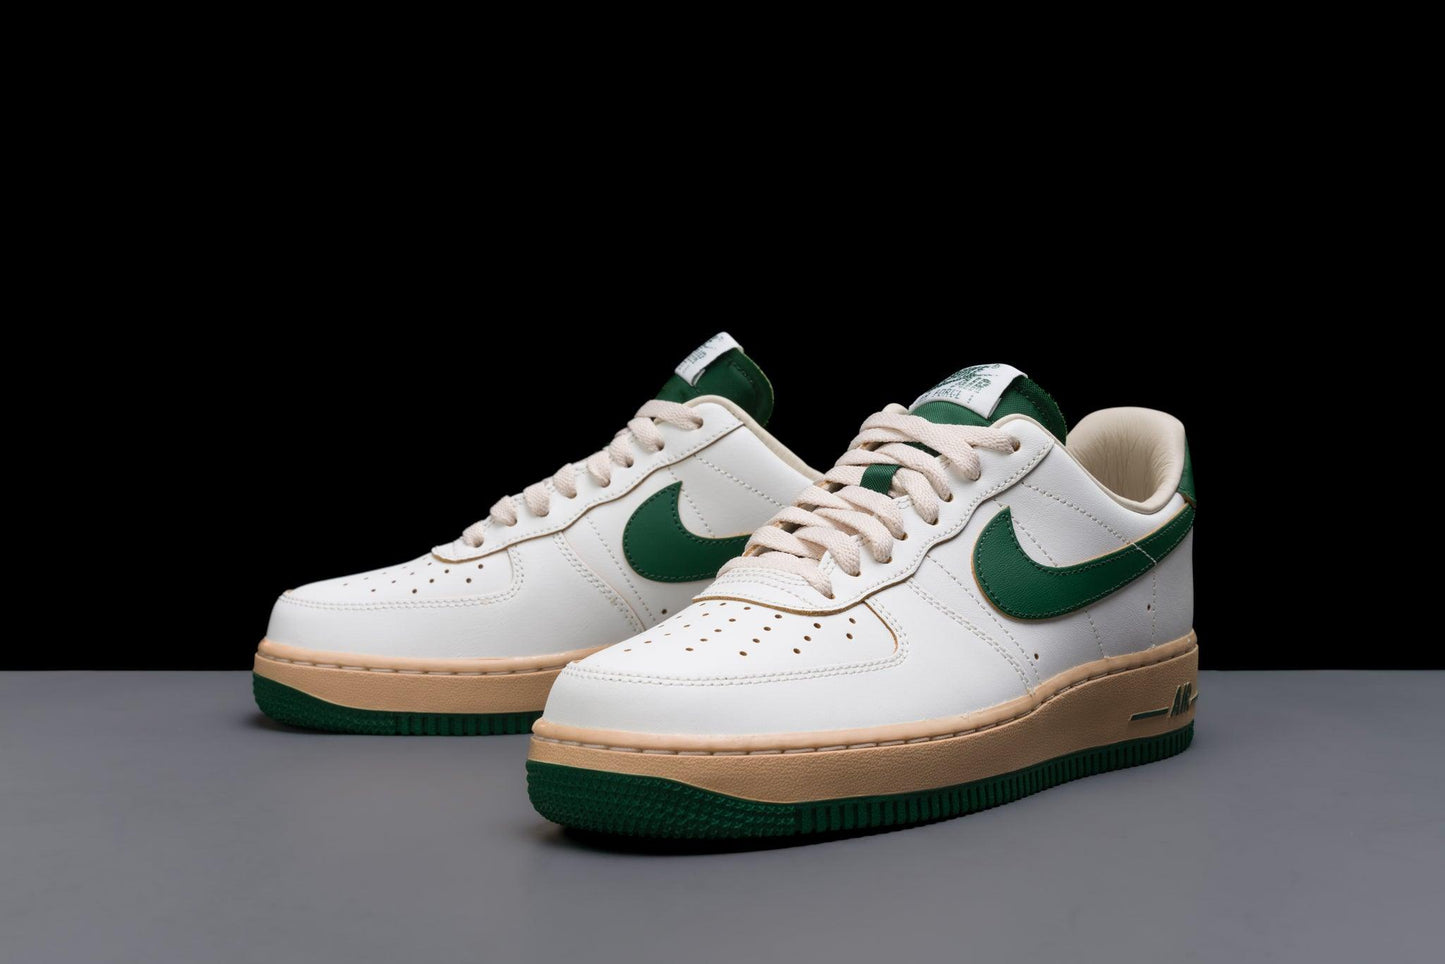 nike air force 1 low vintage gorge green lo10m 3 1445x